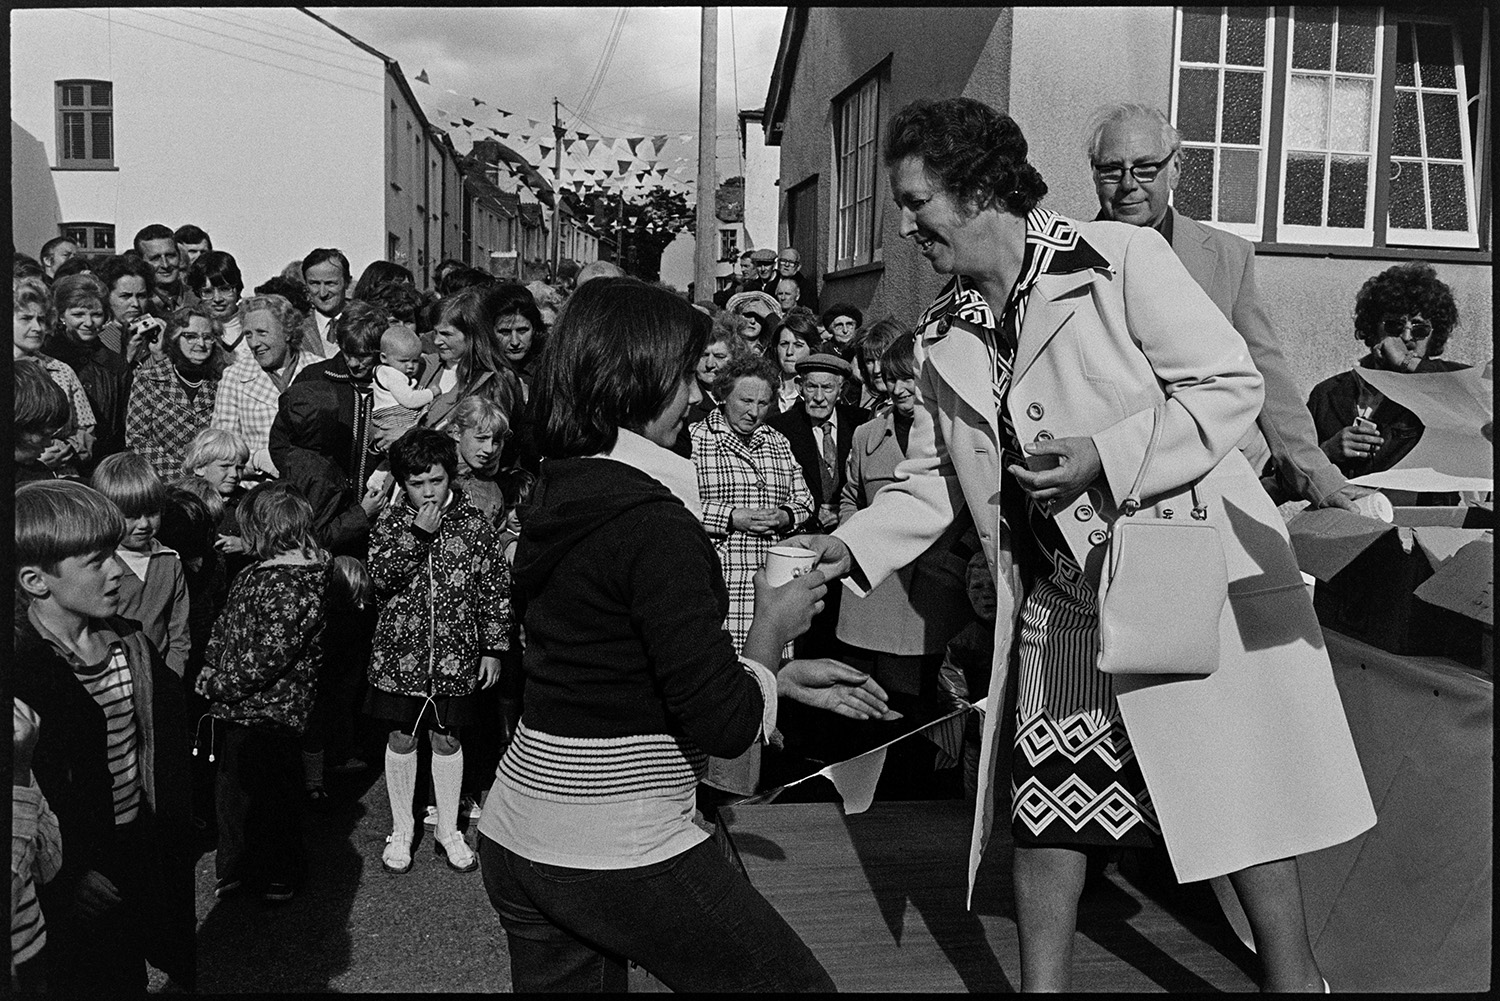 Presentation of mugs in street, crowd watching. 
[Mrs Thomas presenting mugs to children in a street in High Bickington to celebrate the Silver Jubilee of Queen Elizabeth II. A crowd is watching the presentation. The street in the background is decorated with bunting.]